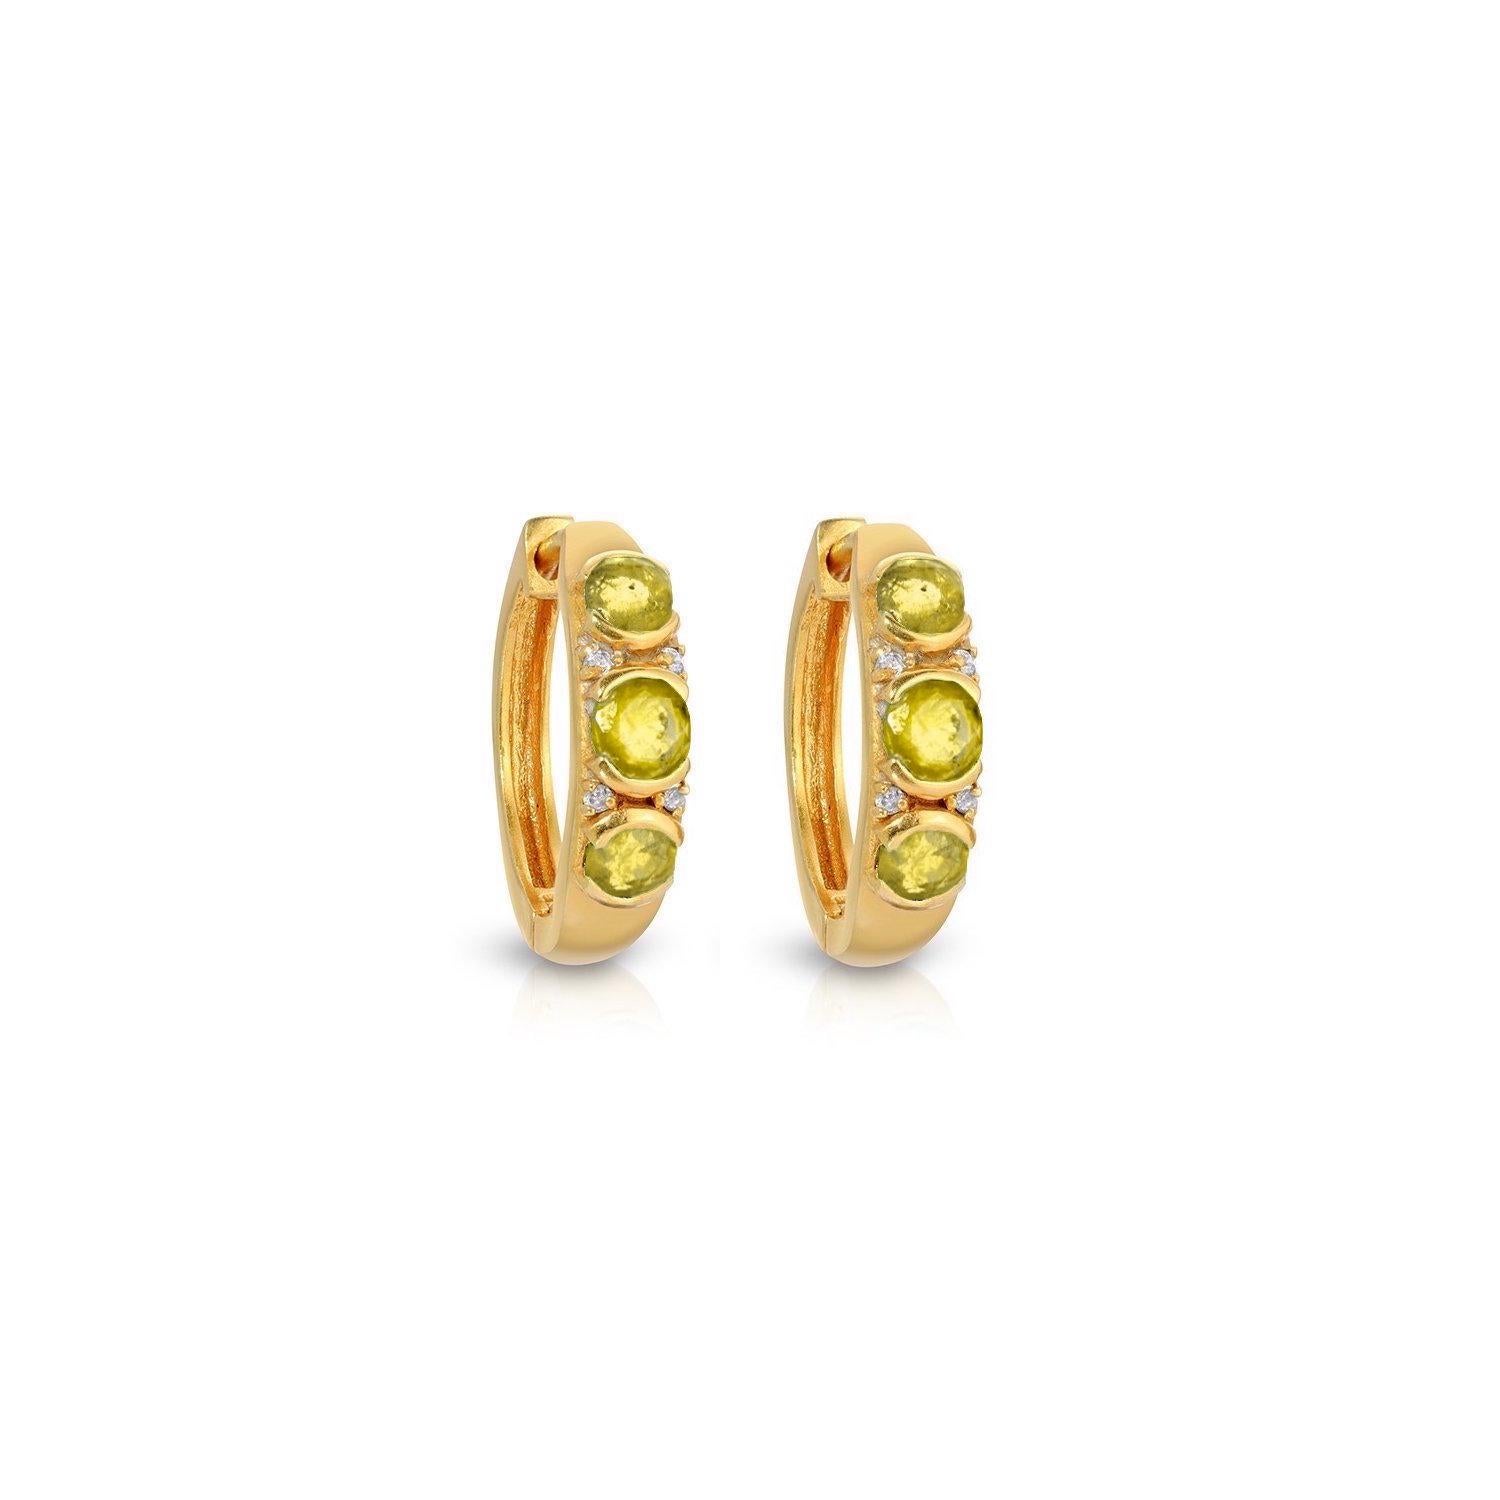 Beautiful hoop earrings in a contemporary design with a glamorous 1980's edge. These earrings feature 2.65 Carats of chunky, triple set Yellow Sapphires enhanced with .02 Carats of Brilliant Cut White Diamonds. These hoops are set in stylish 22